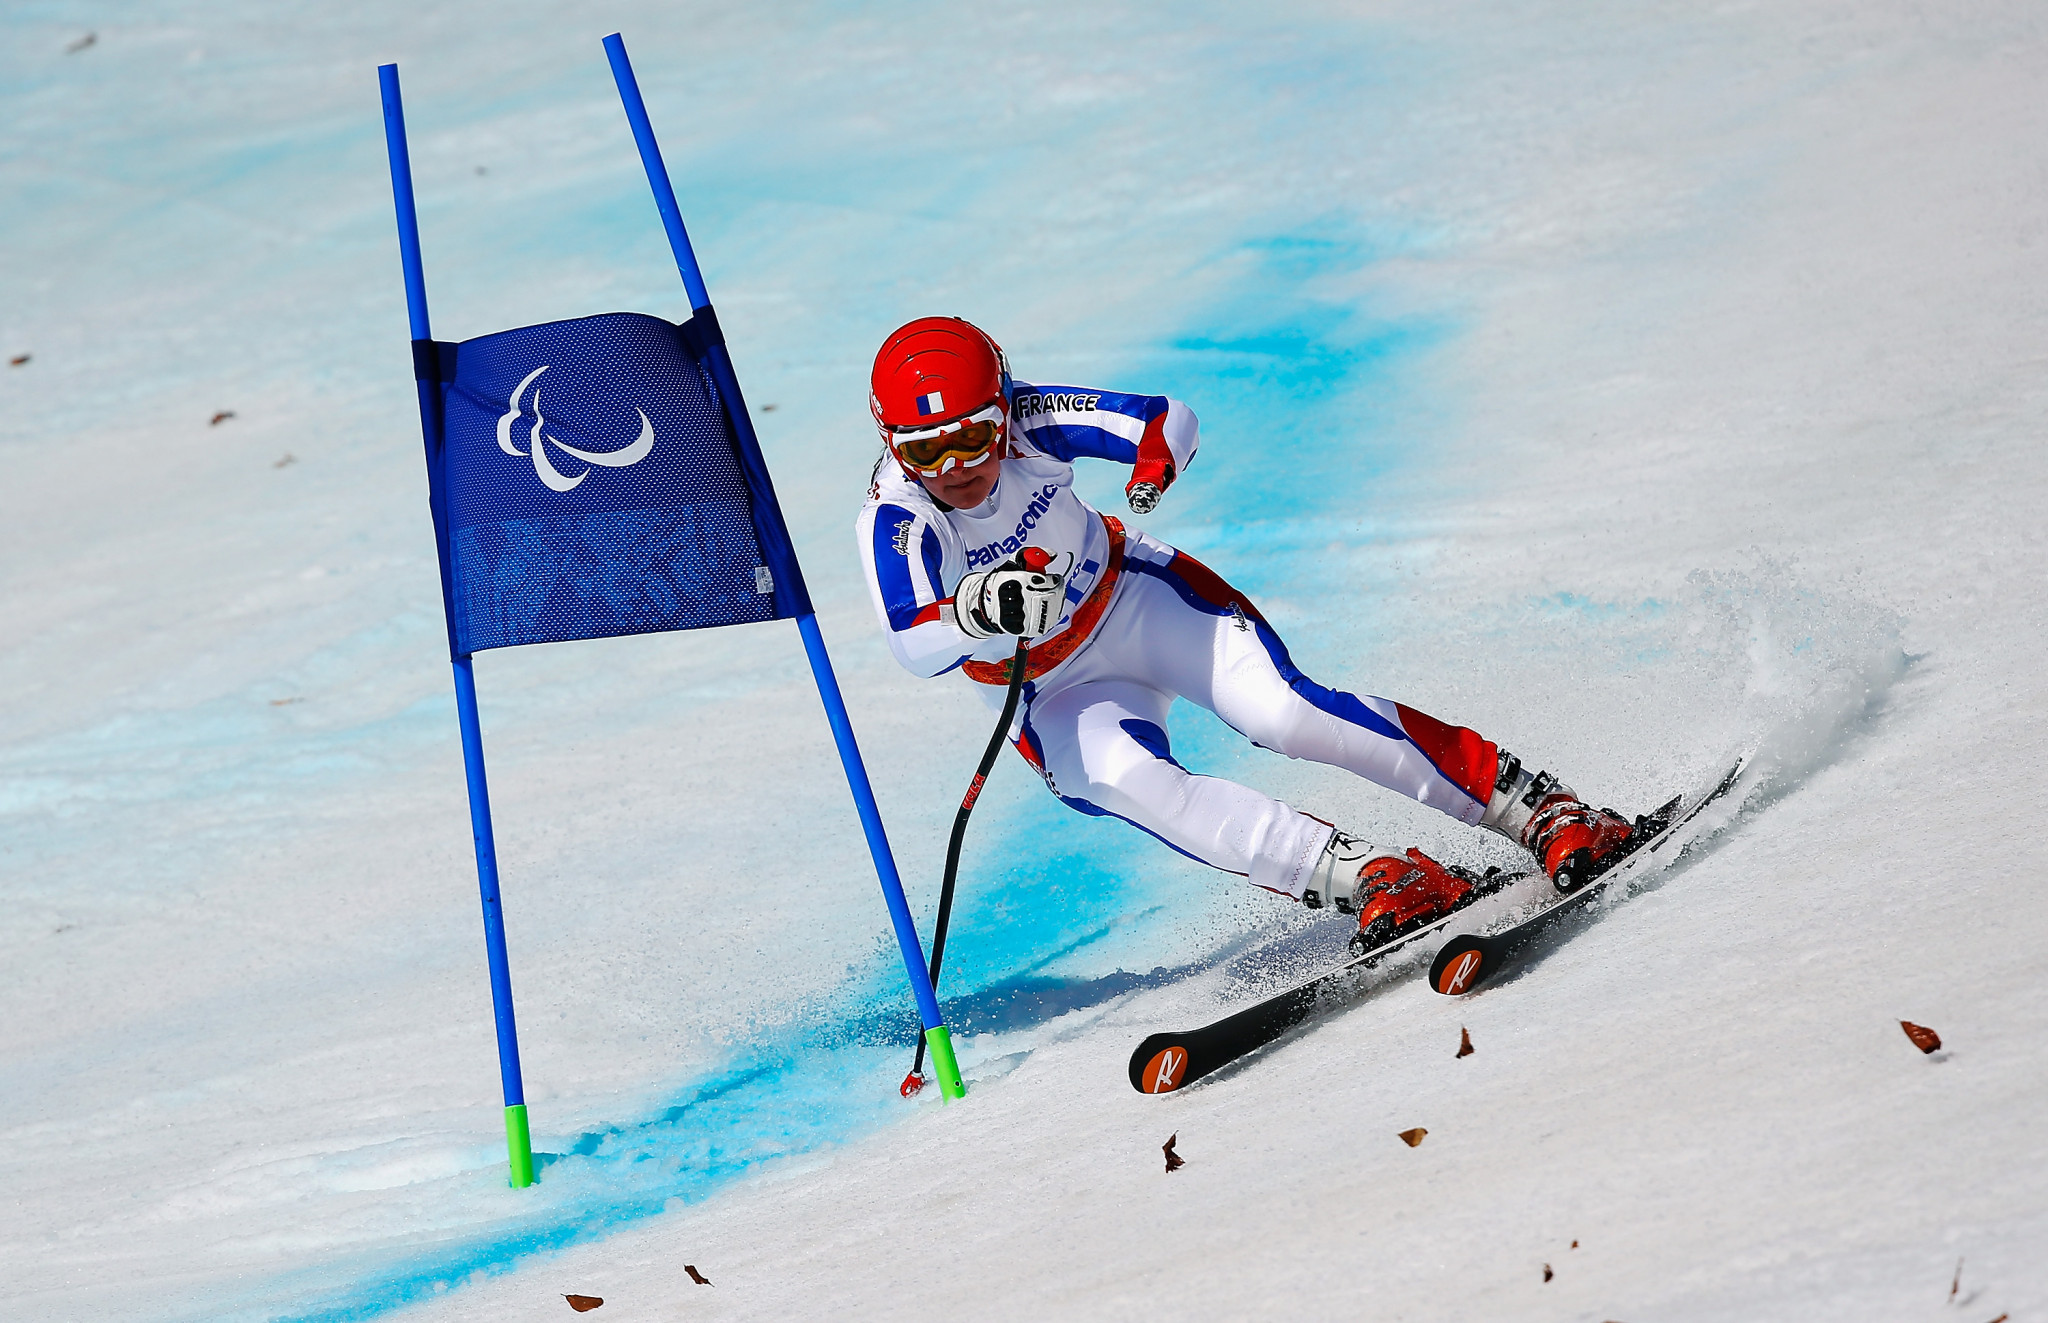 Marie Bochet once again dominated the women's standing event at the World Para Alpine Skiing World Cup ©Getty Images